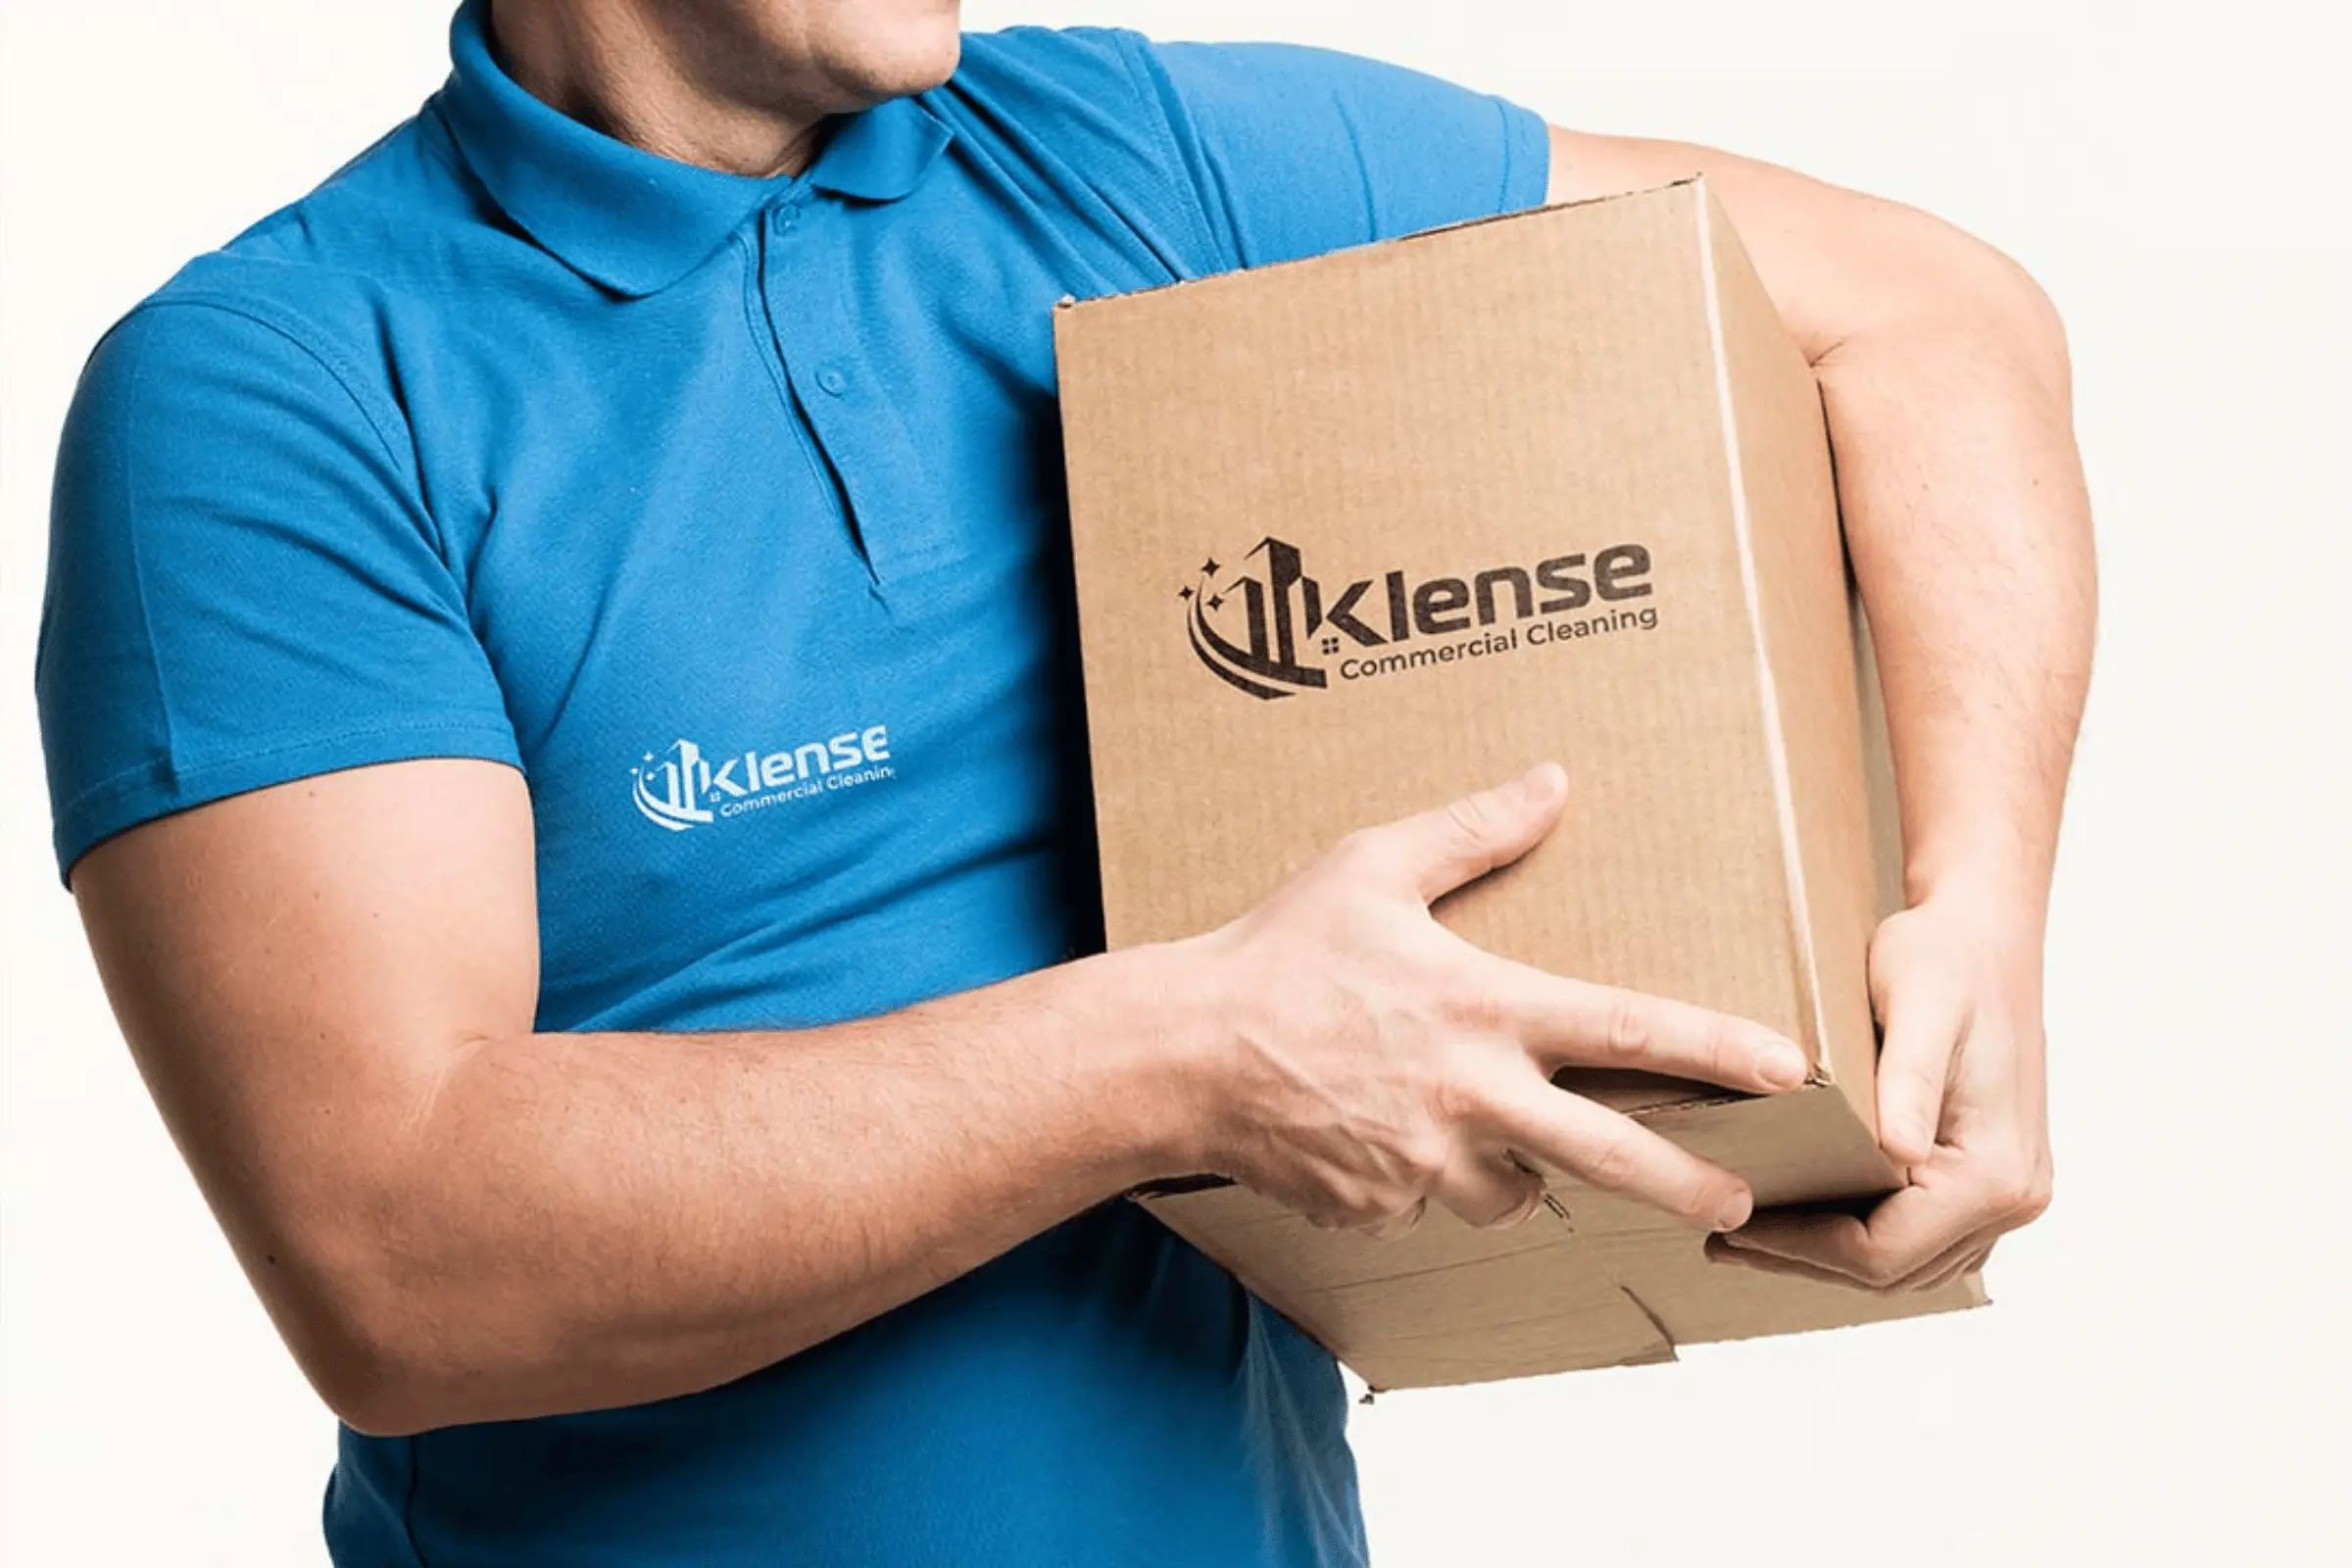 Klense Commercial Cleaning Products Supplier London - IMG 01